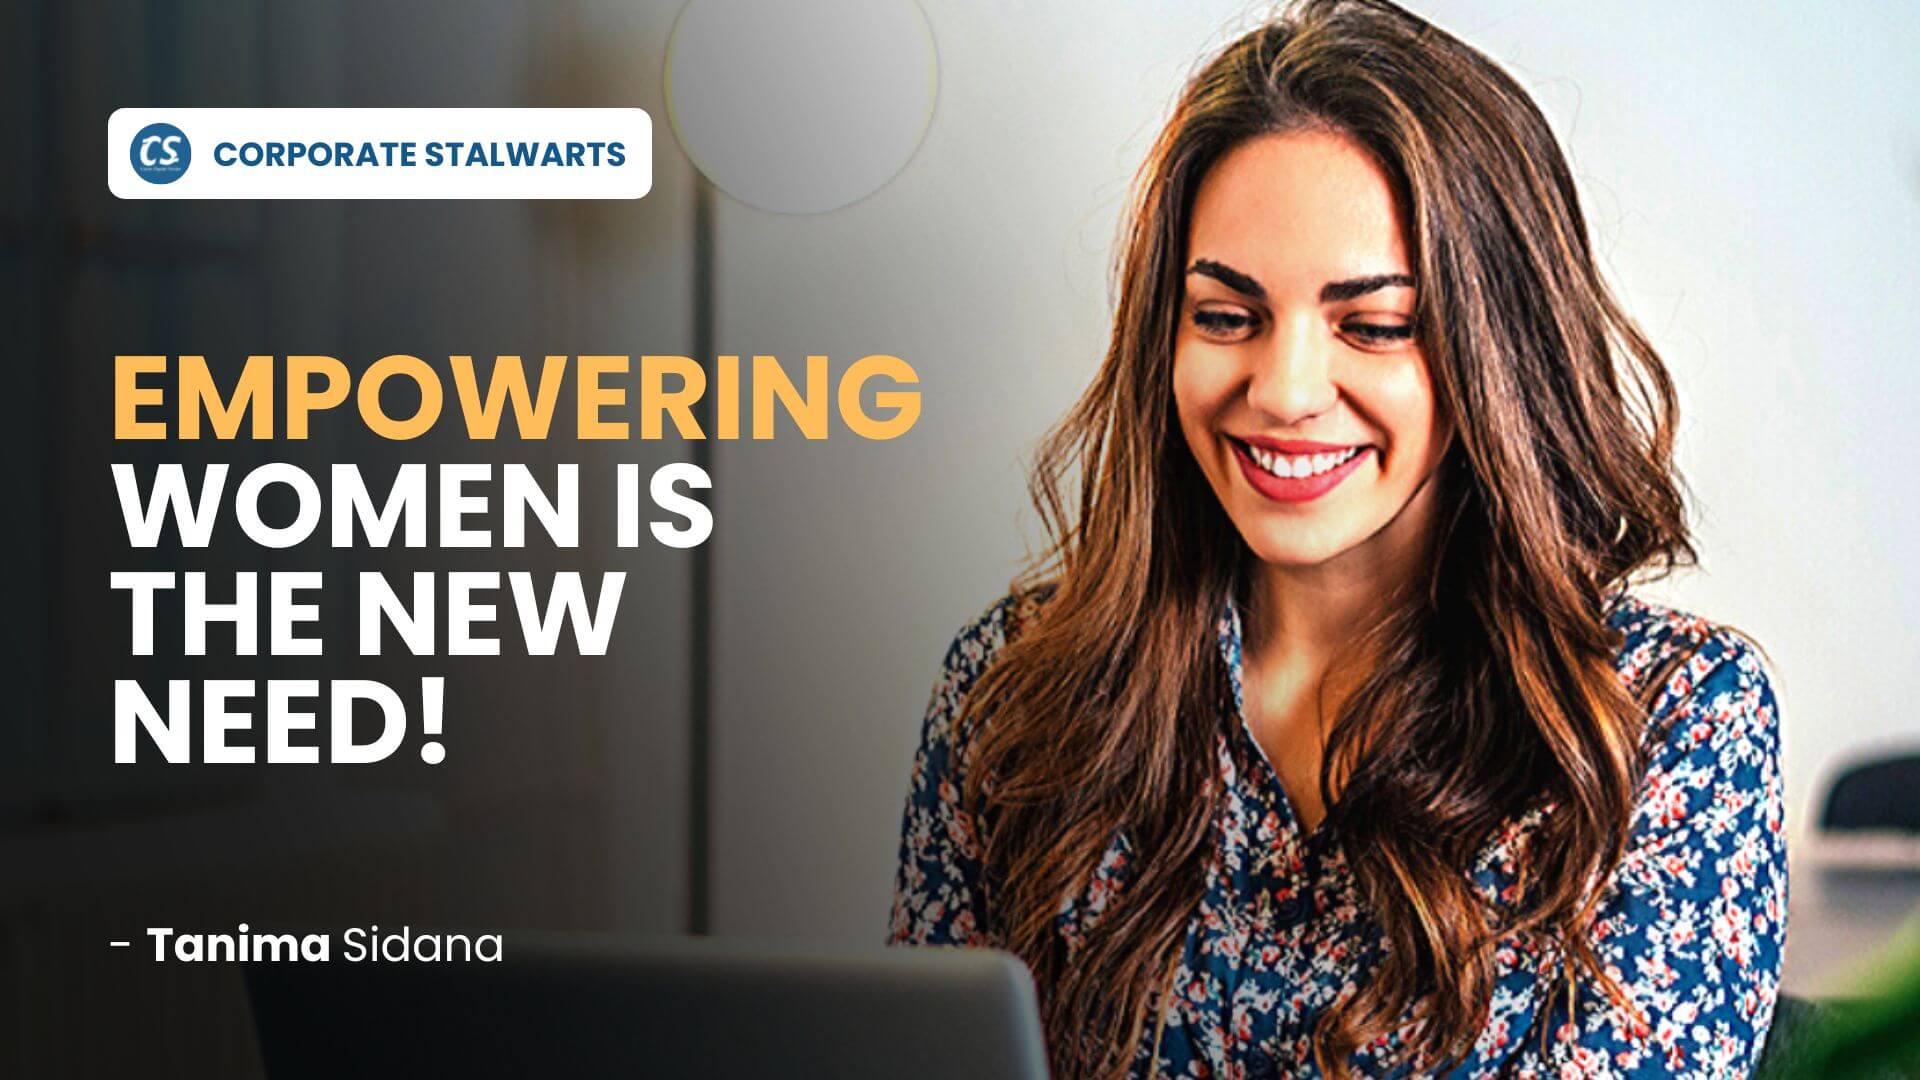 Empowering women is the new need